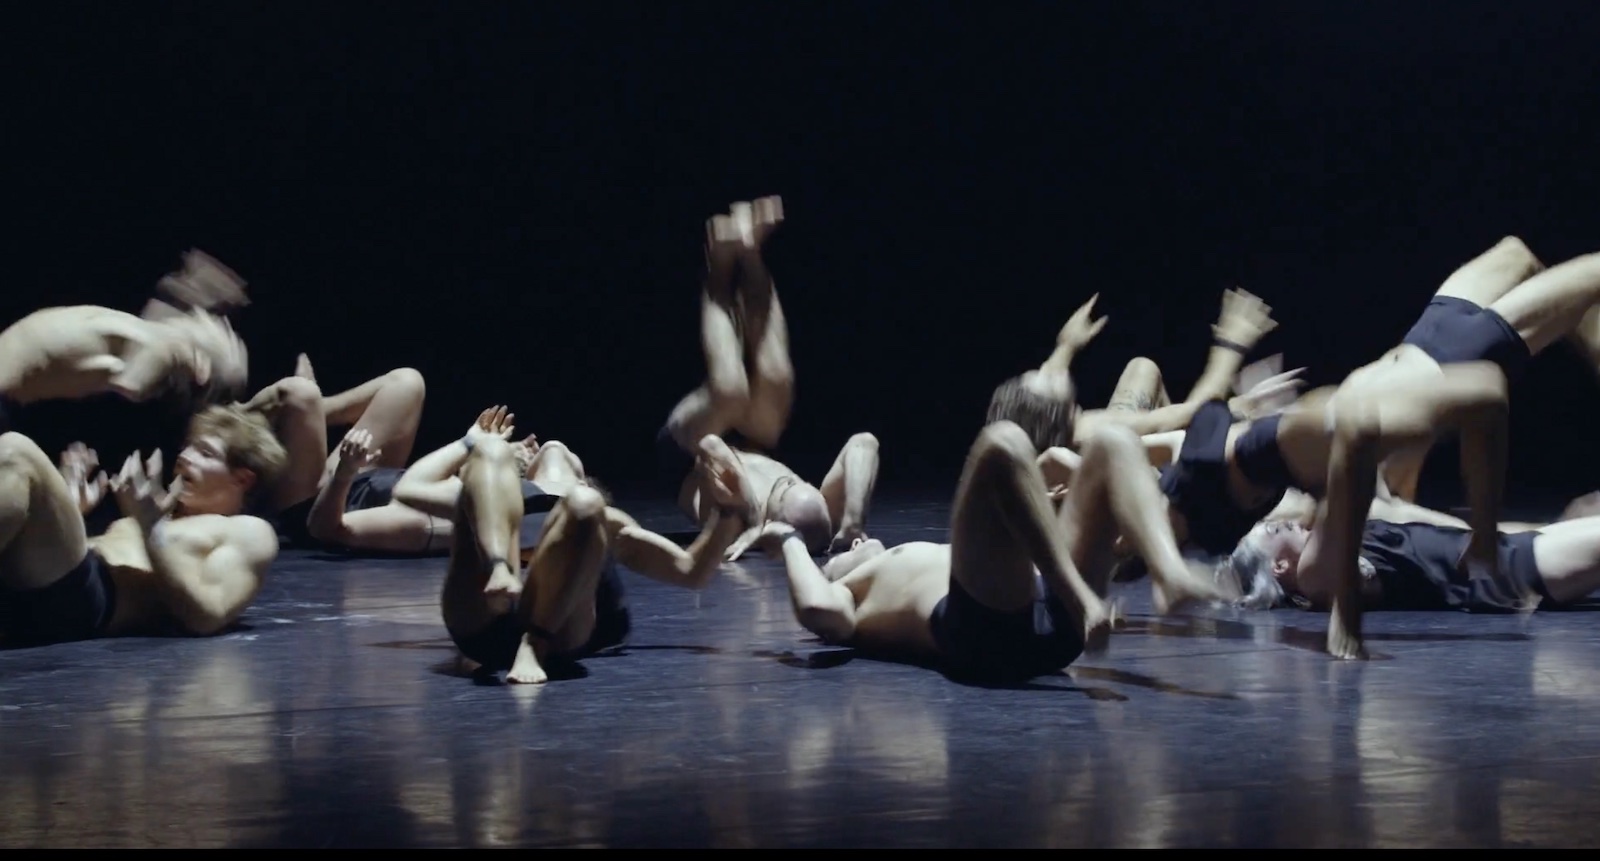 Several dancers are lying on their backs in a circle on a black floor against a black background. They are in the process of moving to rock themselves up on their feet.